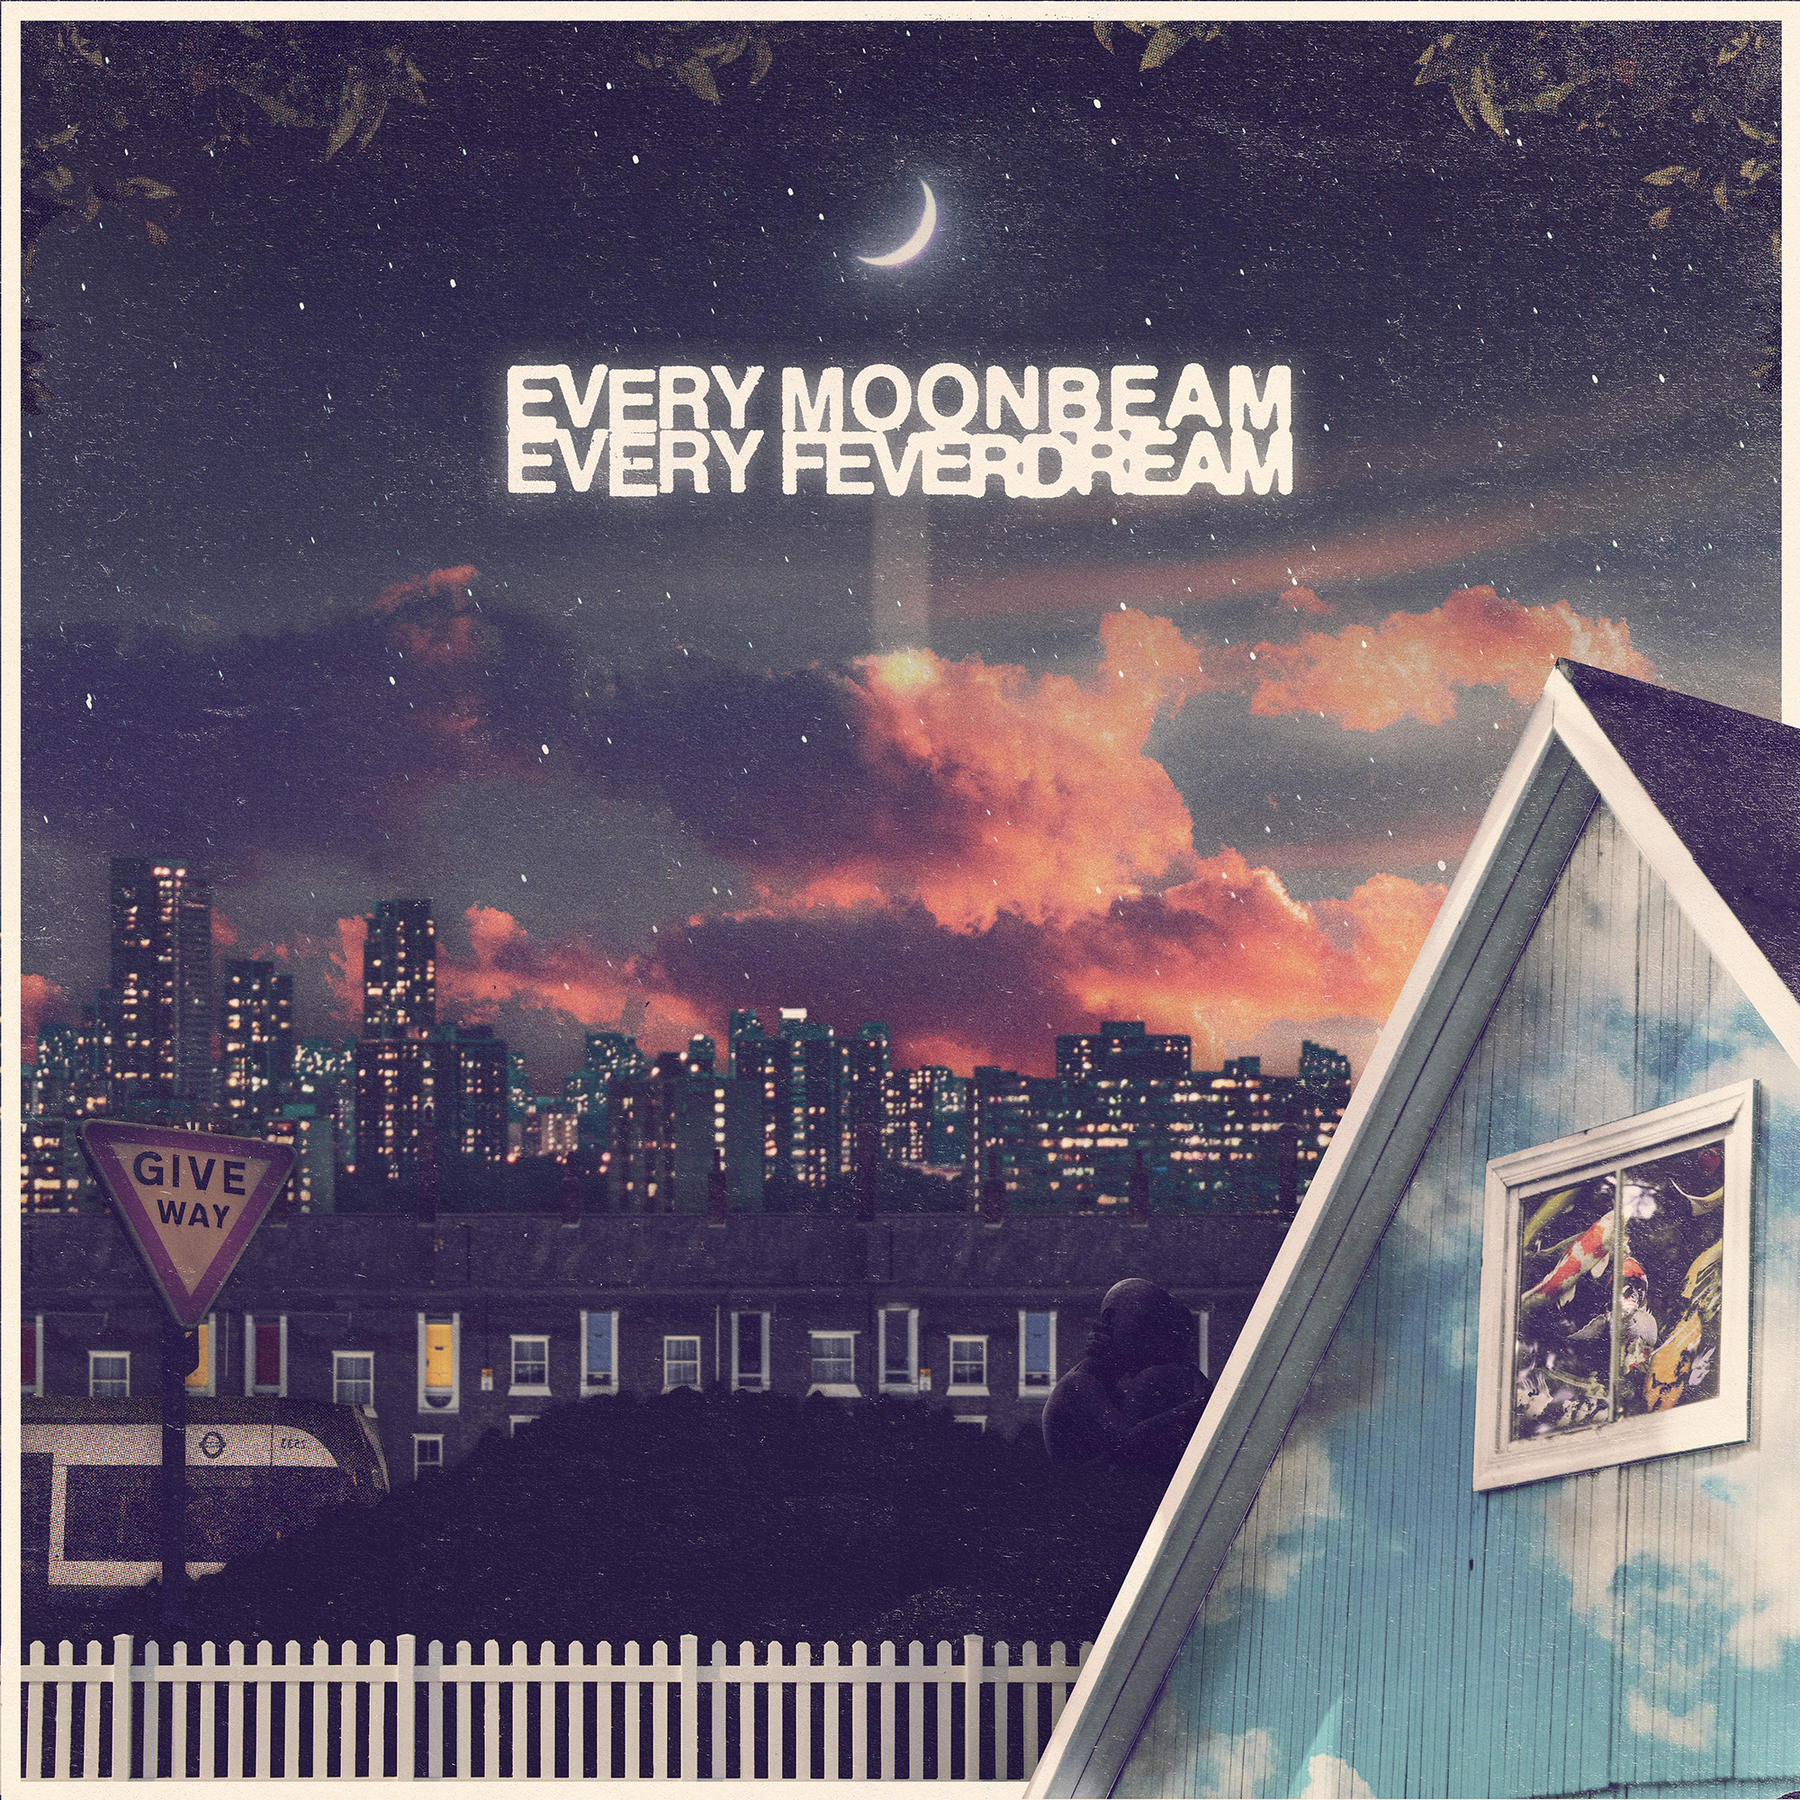 Bears In Trees - Every Moonbeam Every Feverdream (Pre-Order)